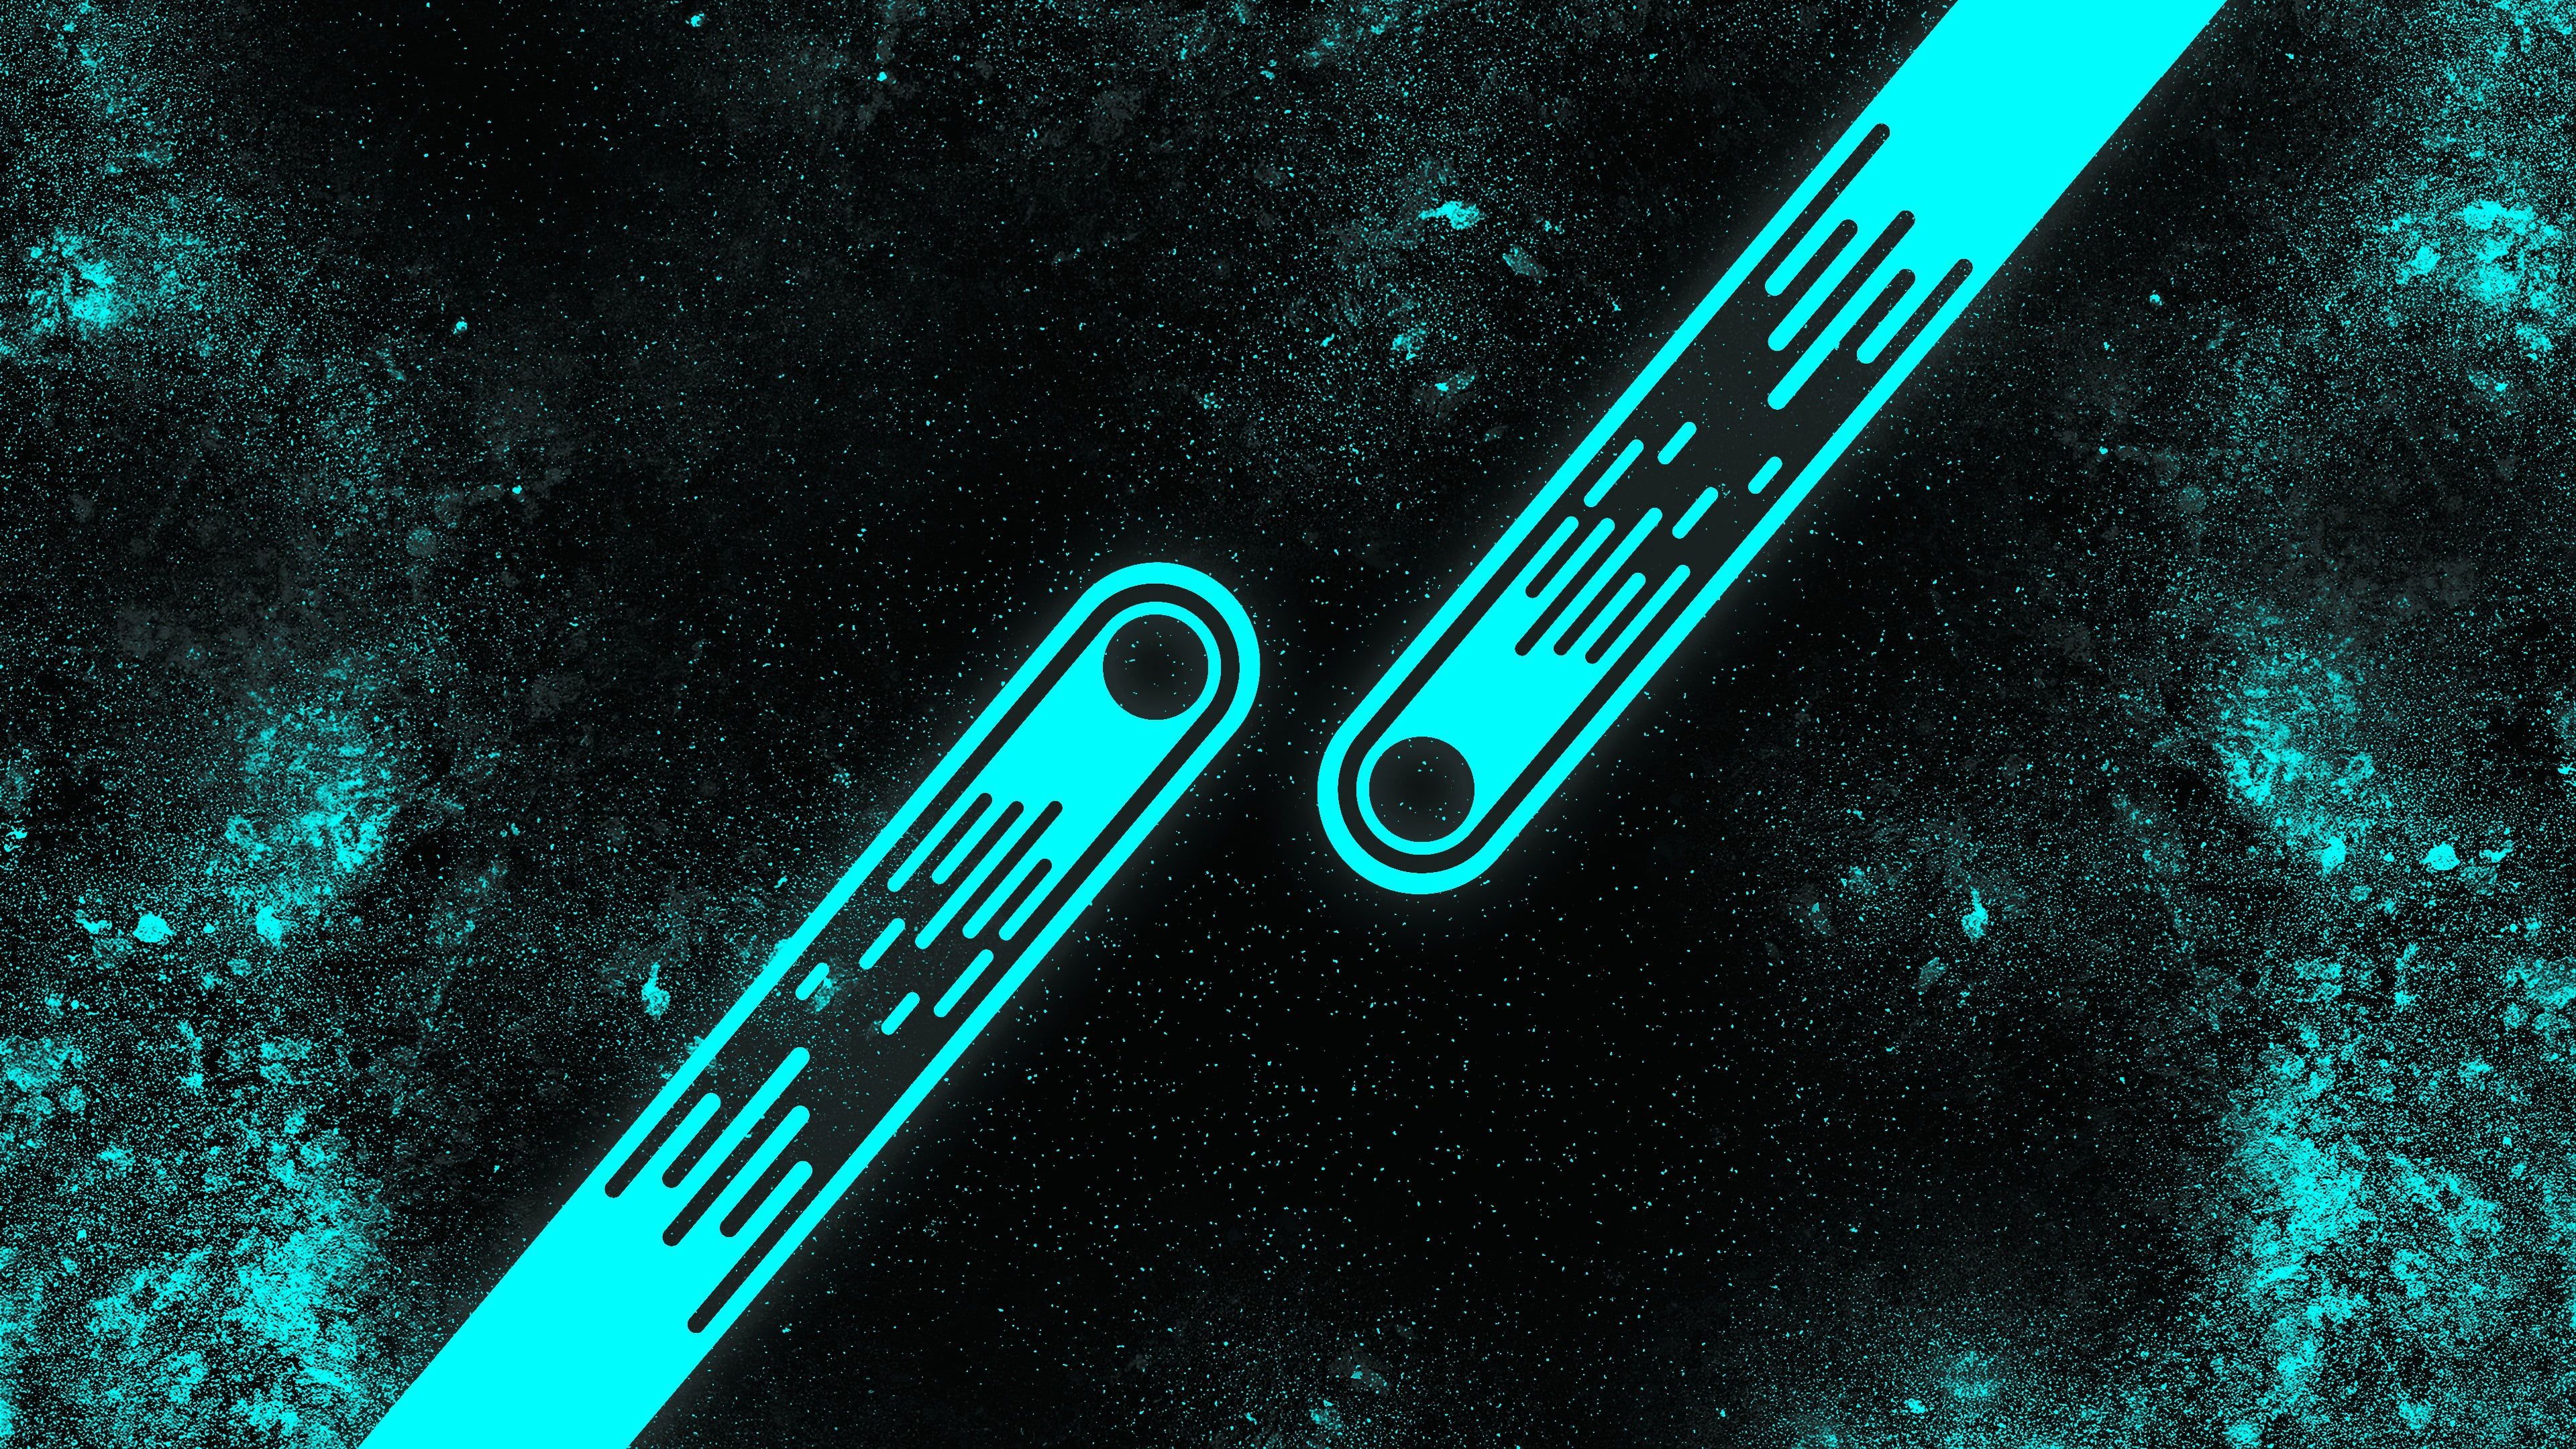 Two White And Black Strips #neon #abstract Graphic Design #meteors #cyan #stars #turquoise K #wallpaper. Abstract Graphic Design, Neon Wallpaper, Graphic Design